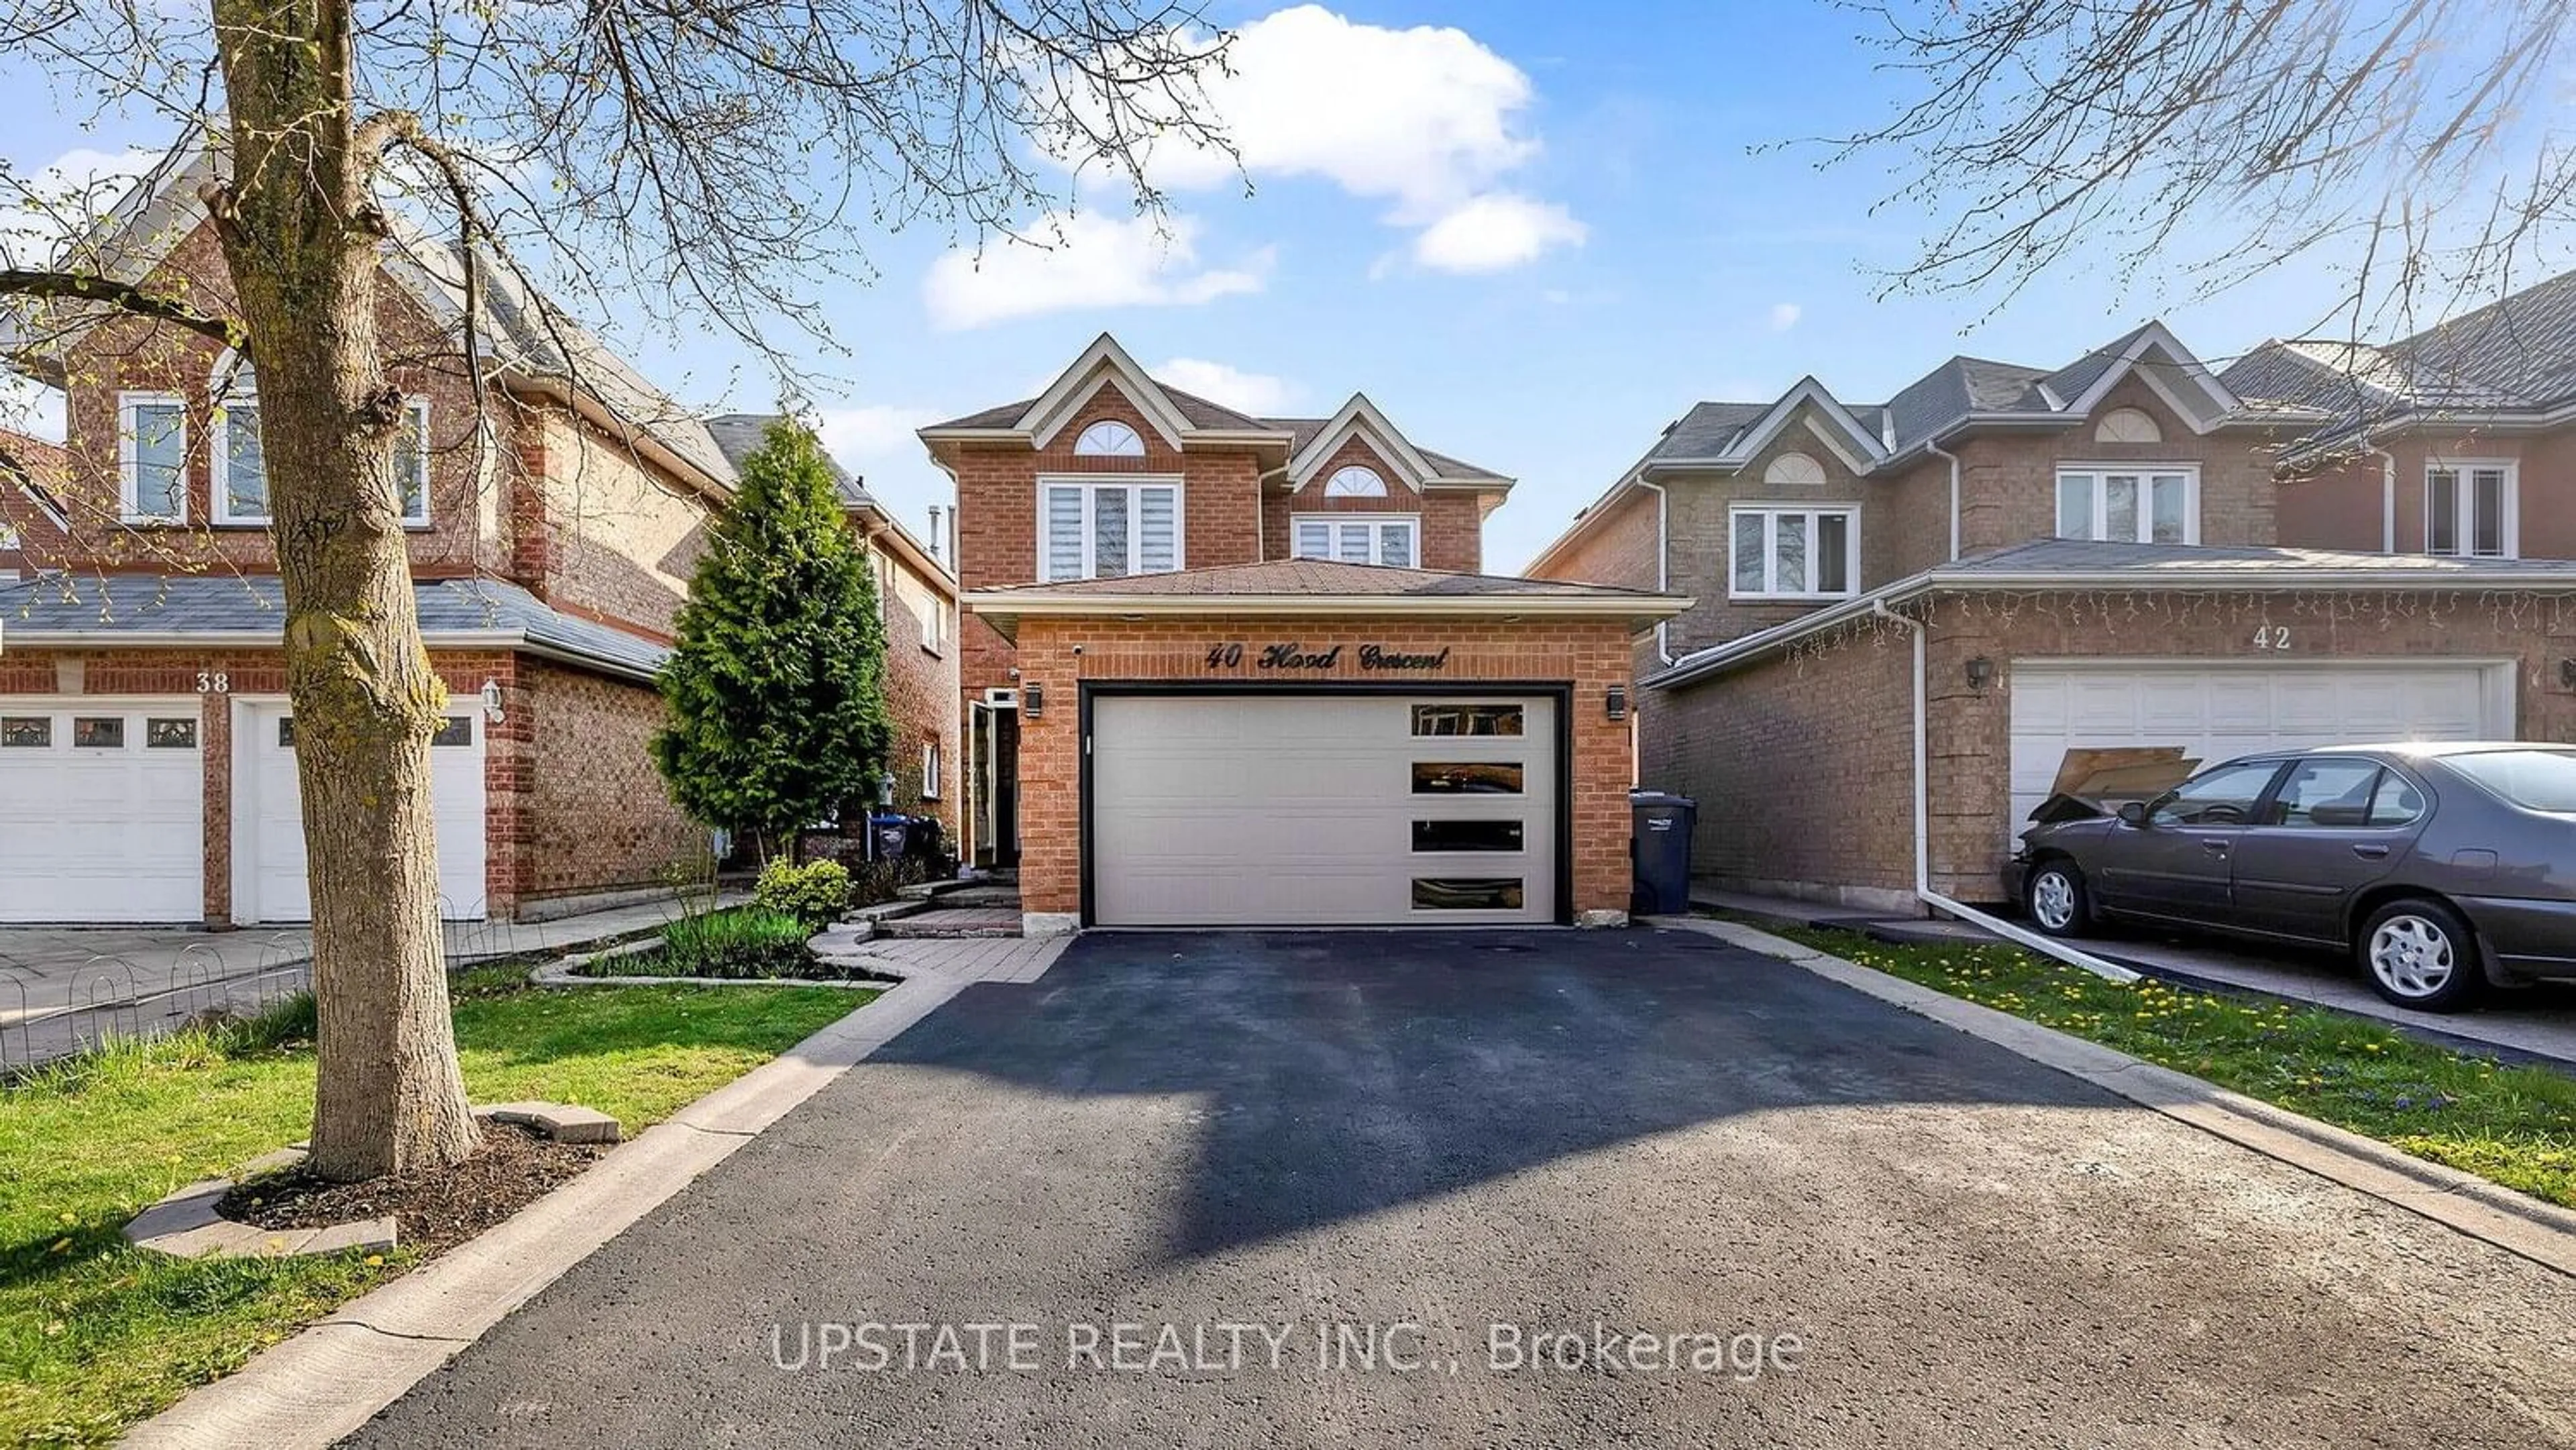 Frontside or backside of a home for 40 Hood Cres, Brampton Ontario L6Y 4S7